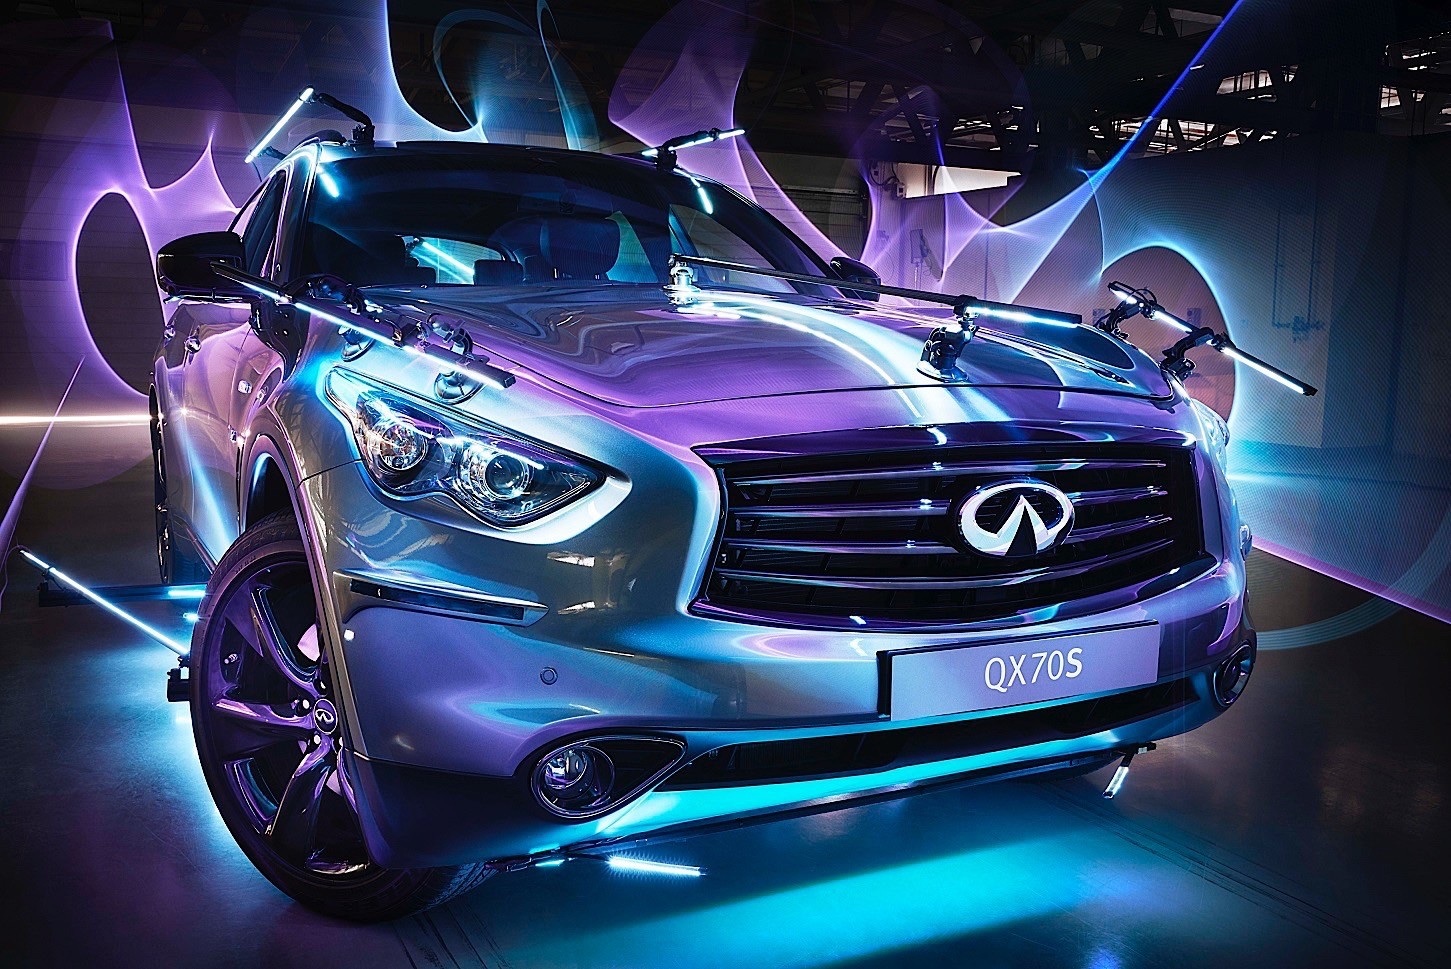 Video: Spectacular ‘light painting’ photo shoot with the Infiniti QX70